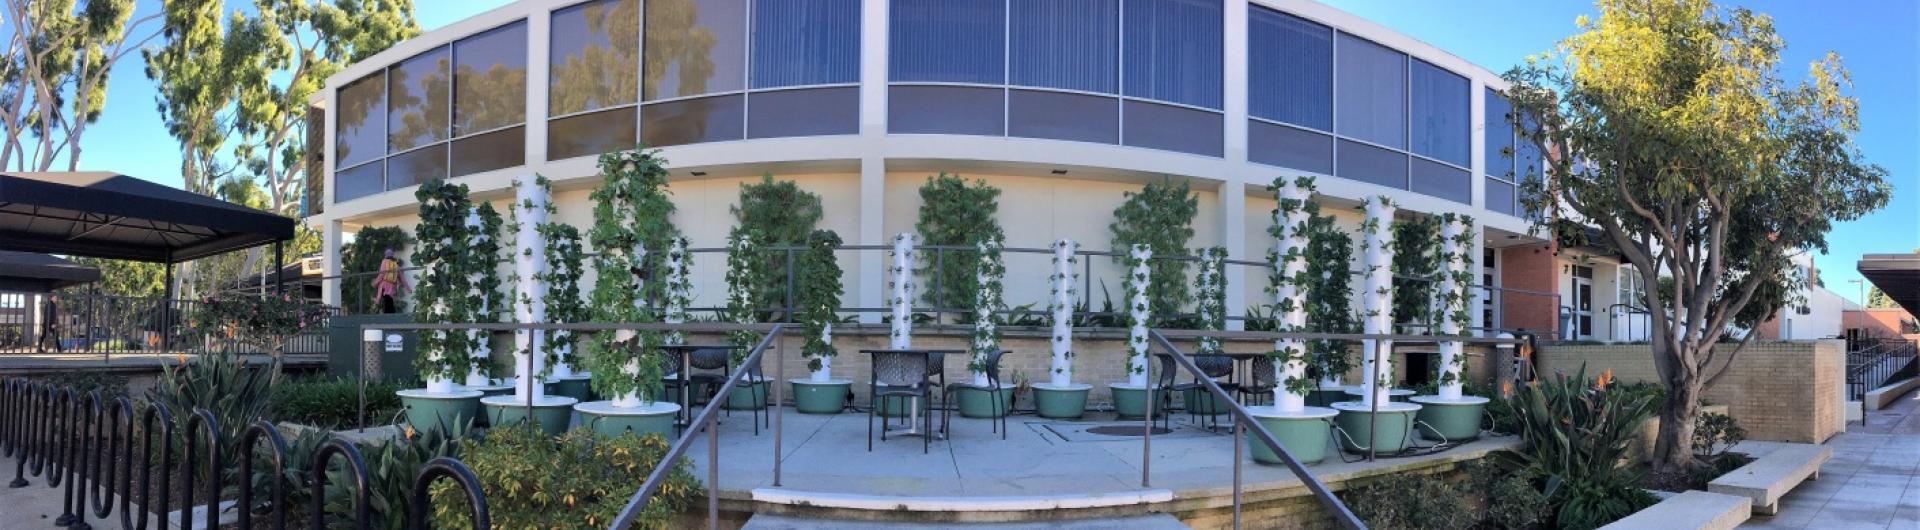 Image of Lettuce Grow towers by Nugget Grill